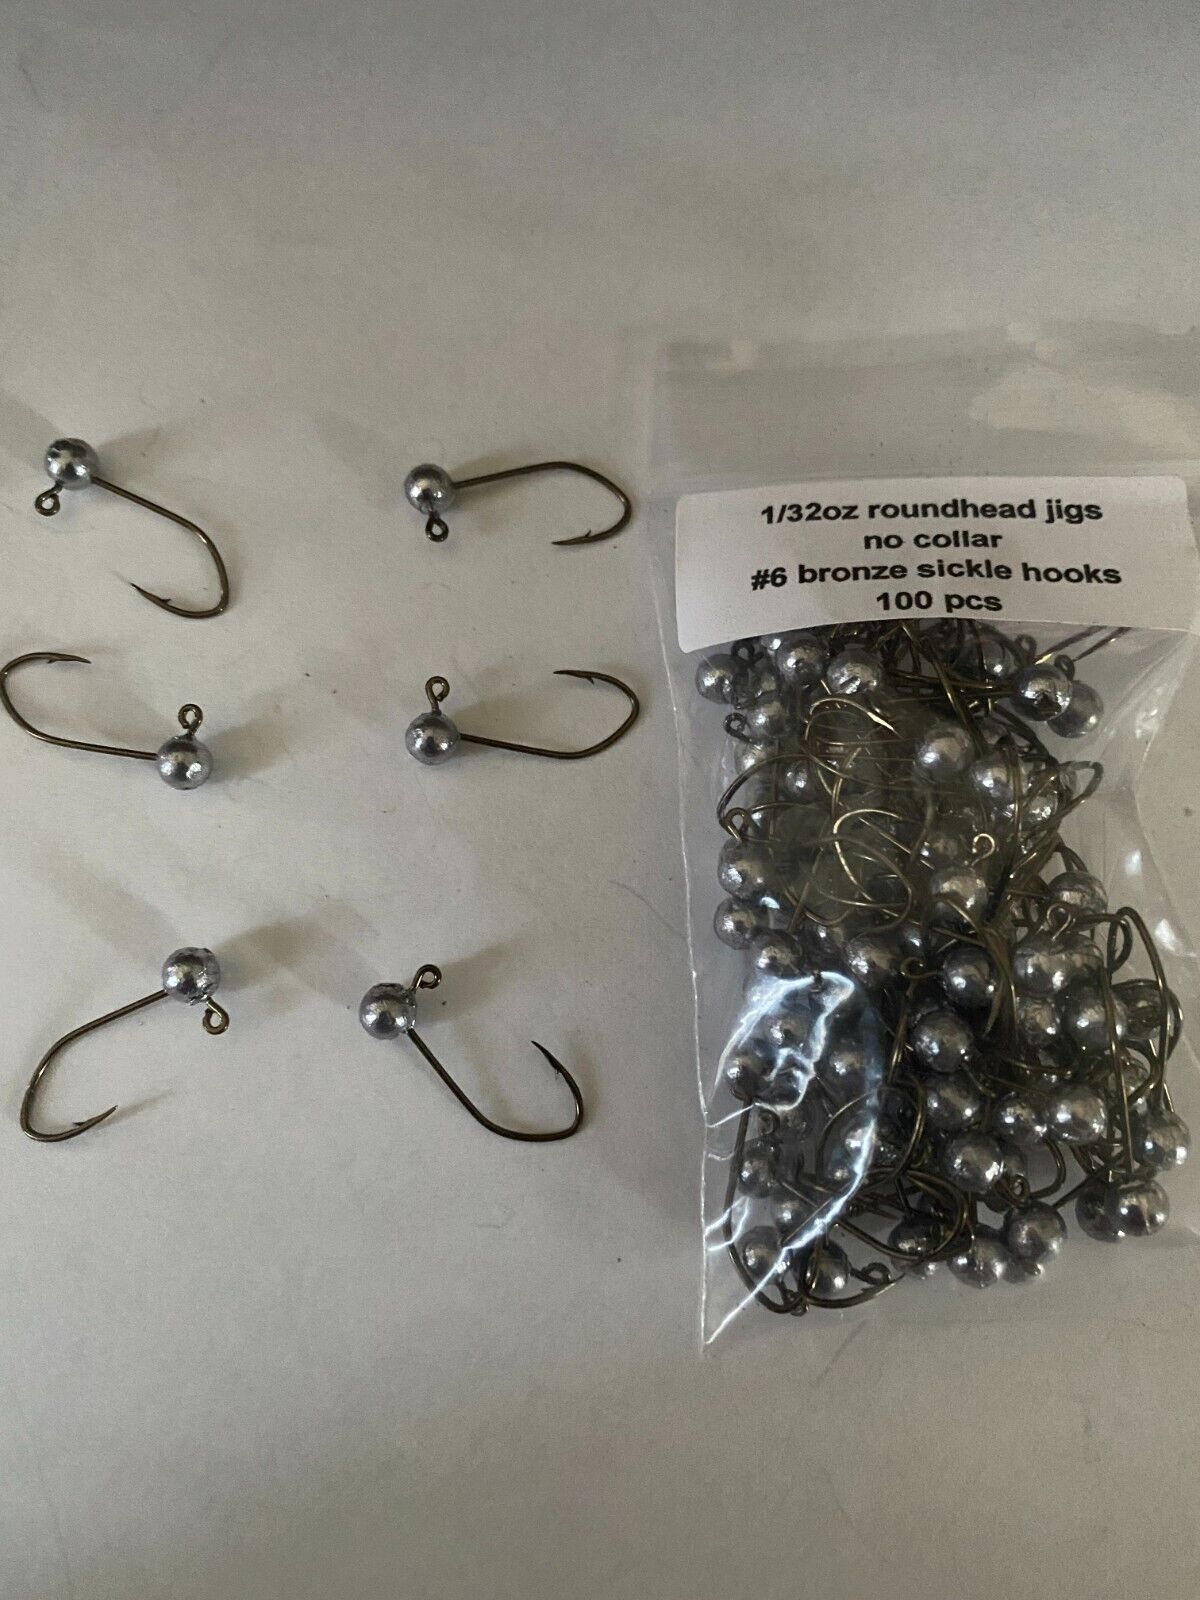 1/32oz Roundhead jig with no collar with #6 or #4 bronze sickle